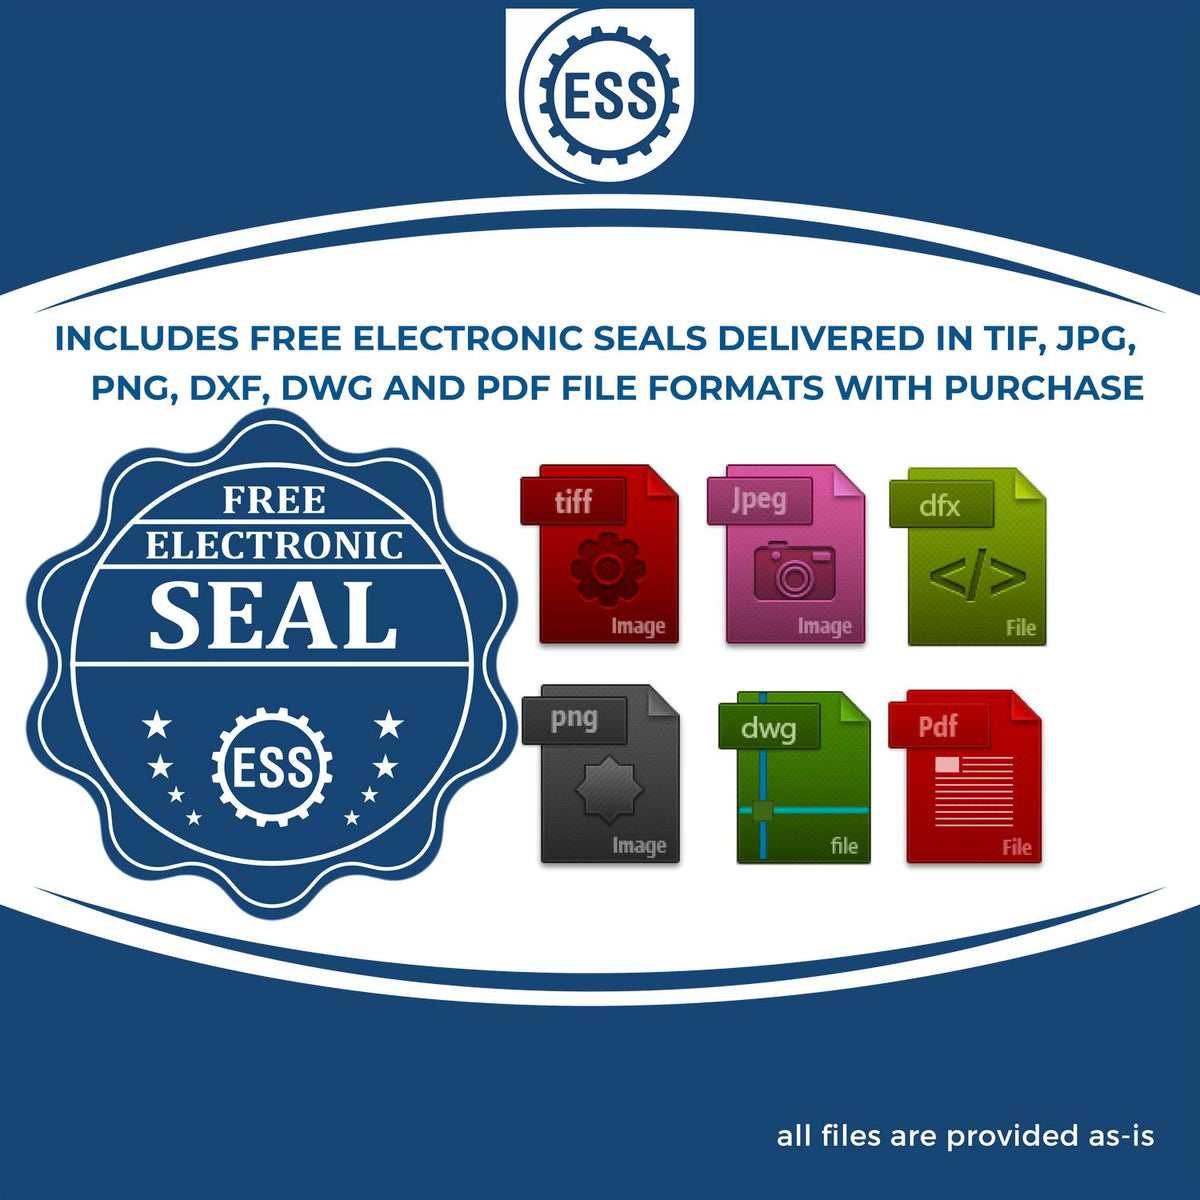 An infographic for the free electronic seal for the Slim Pre-Inked Arkansas Professional Geologist Seal Stamp illustrating the different file type icons such as DXF, DWG, TIF, JPG and PNG.